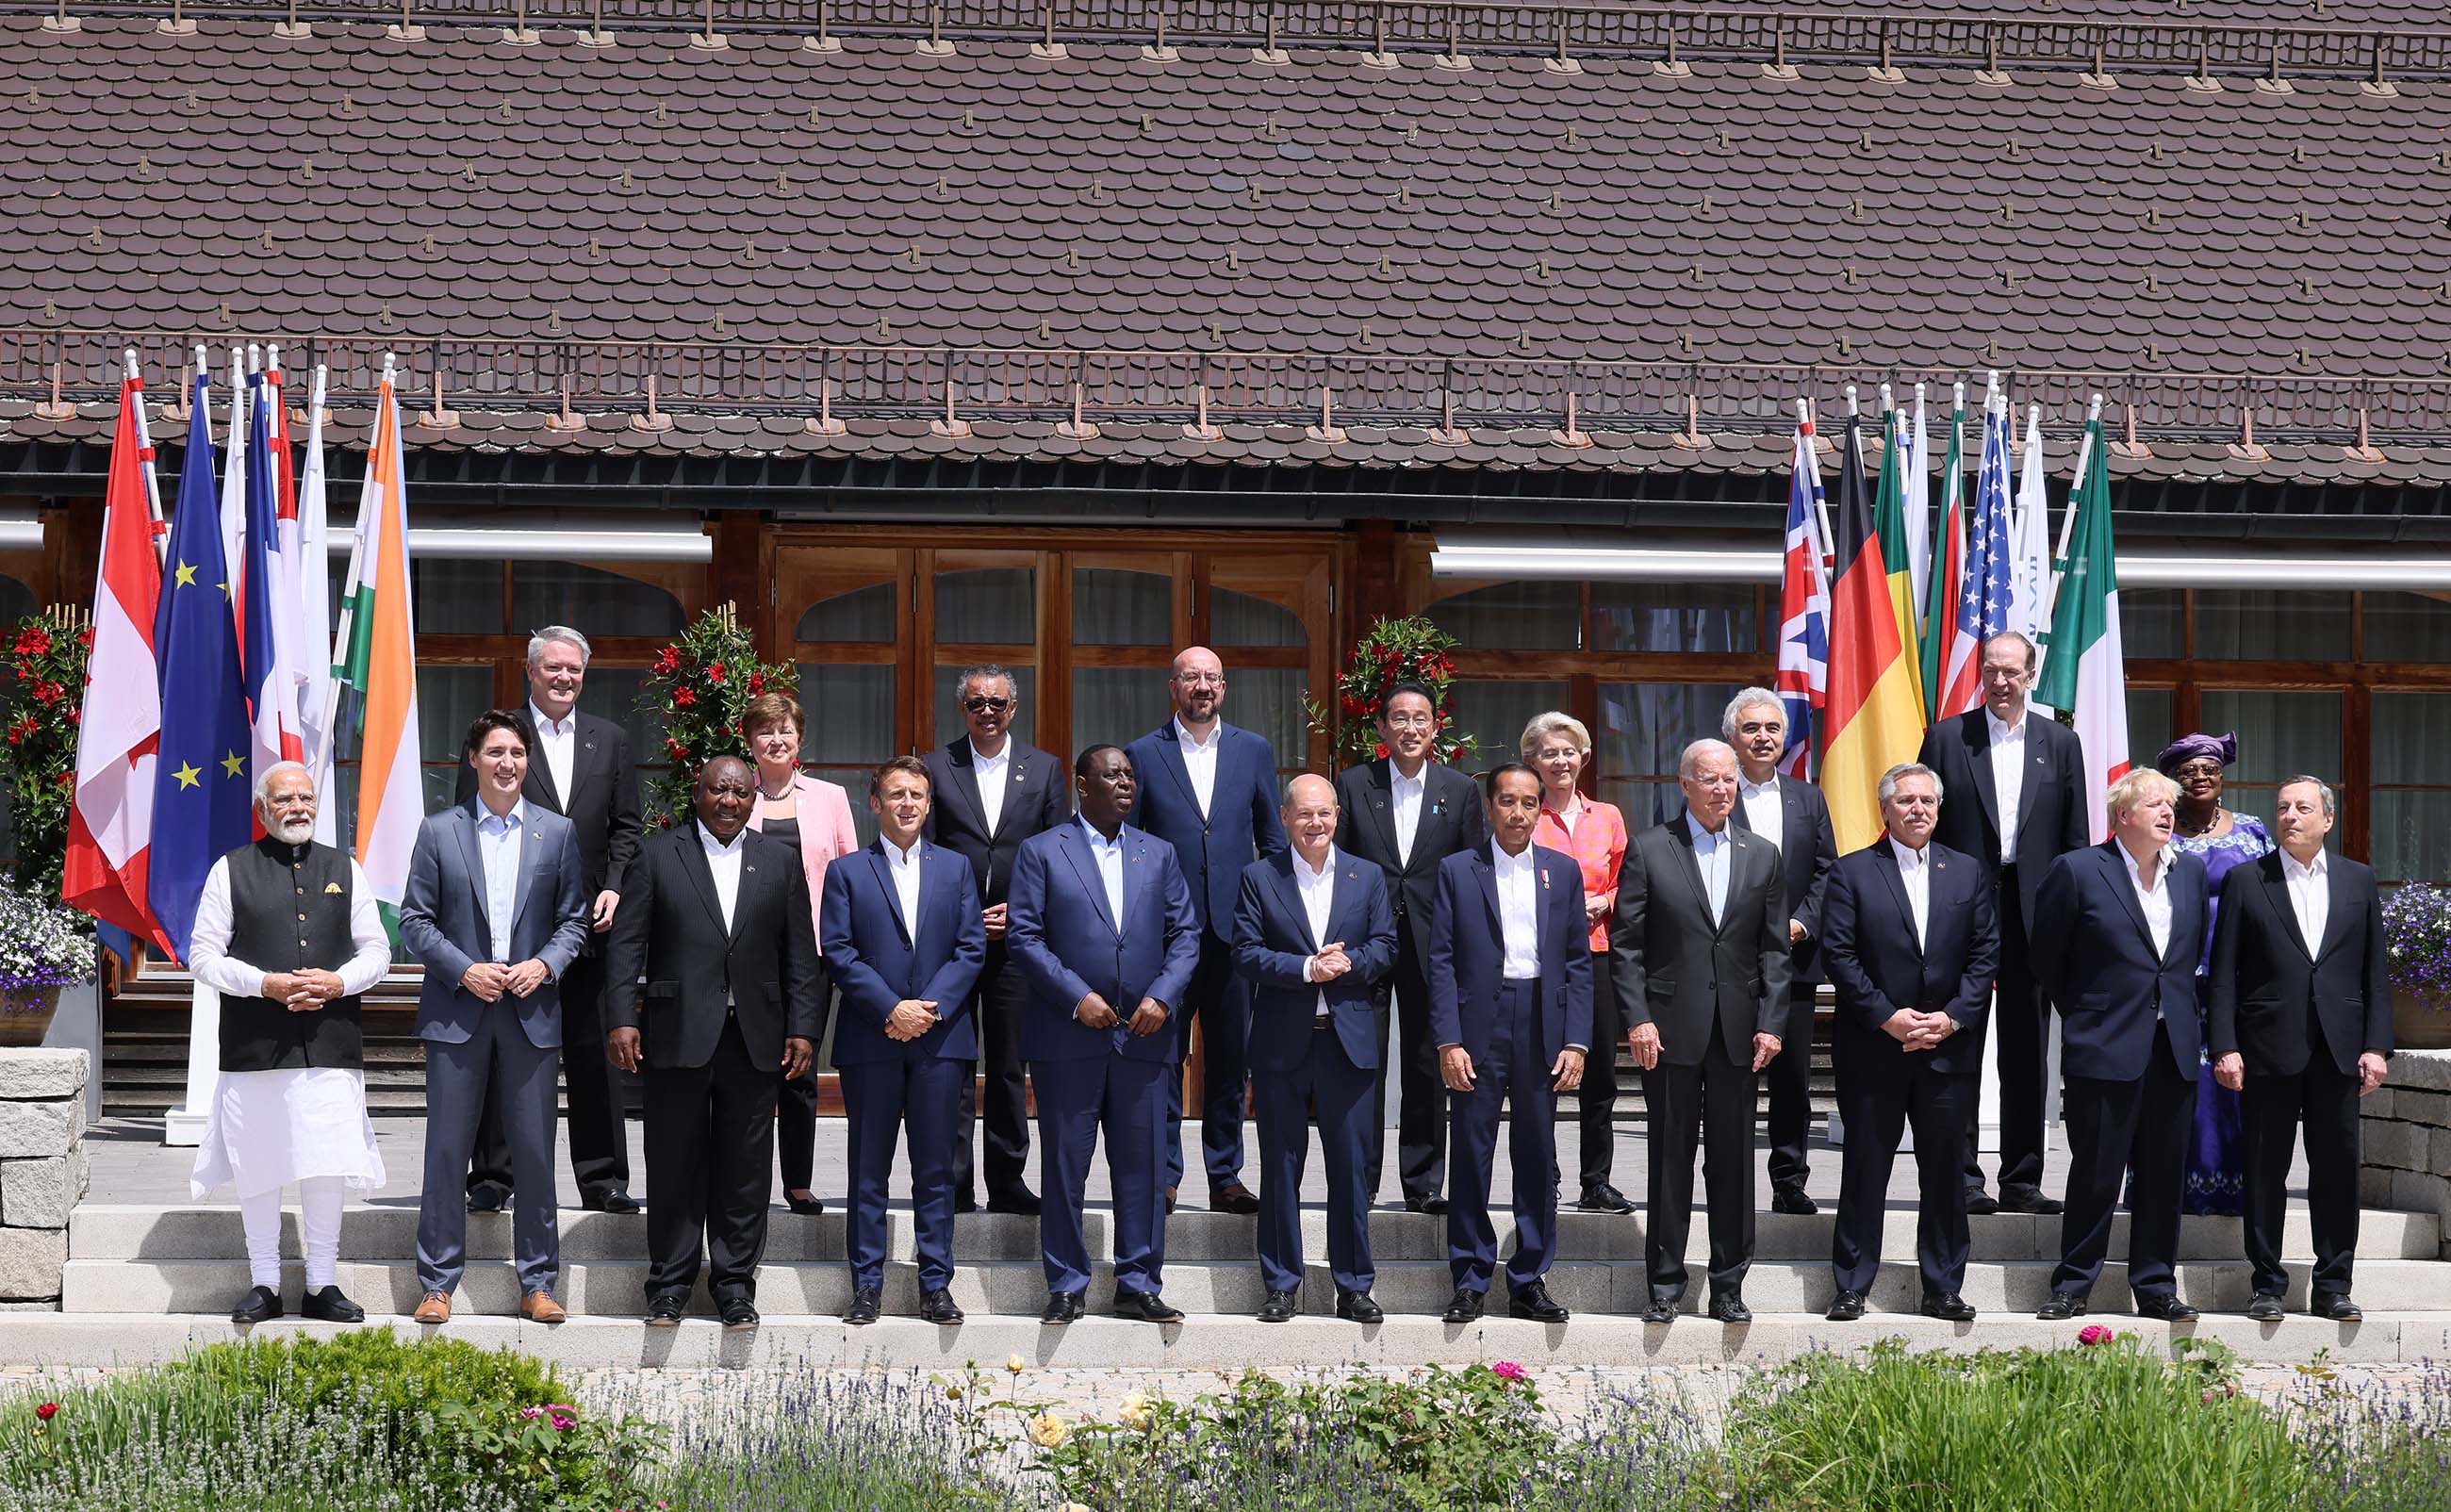 Photograph of a group photo session with the leaders of the G7 members and guest countries (1)